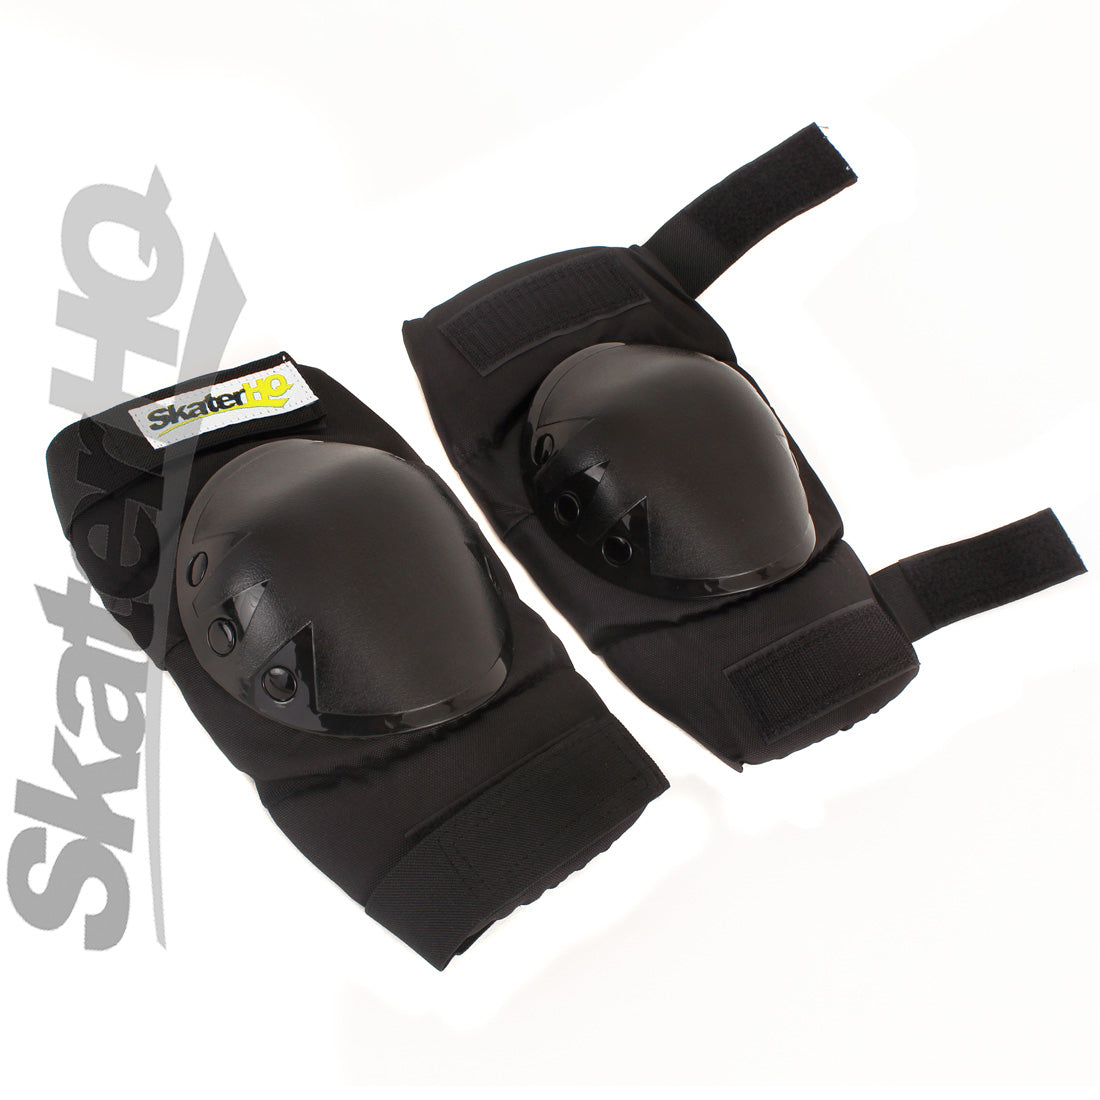 Skater HQ Tri Pack - XLarge Protective Gear